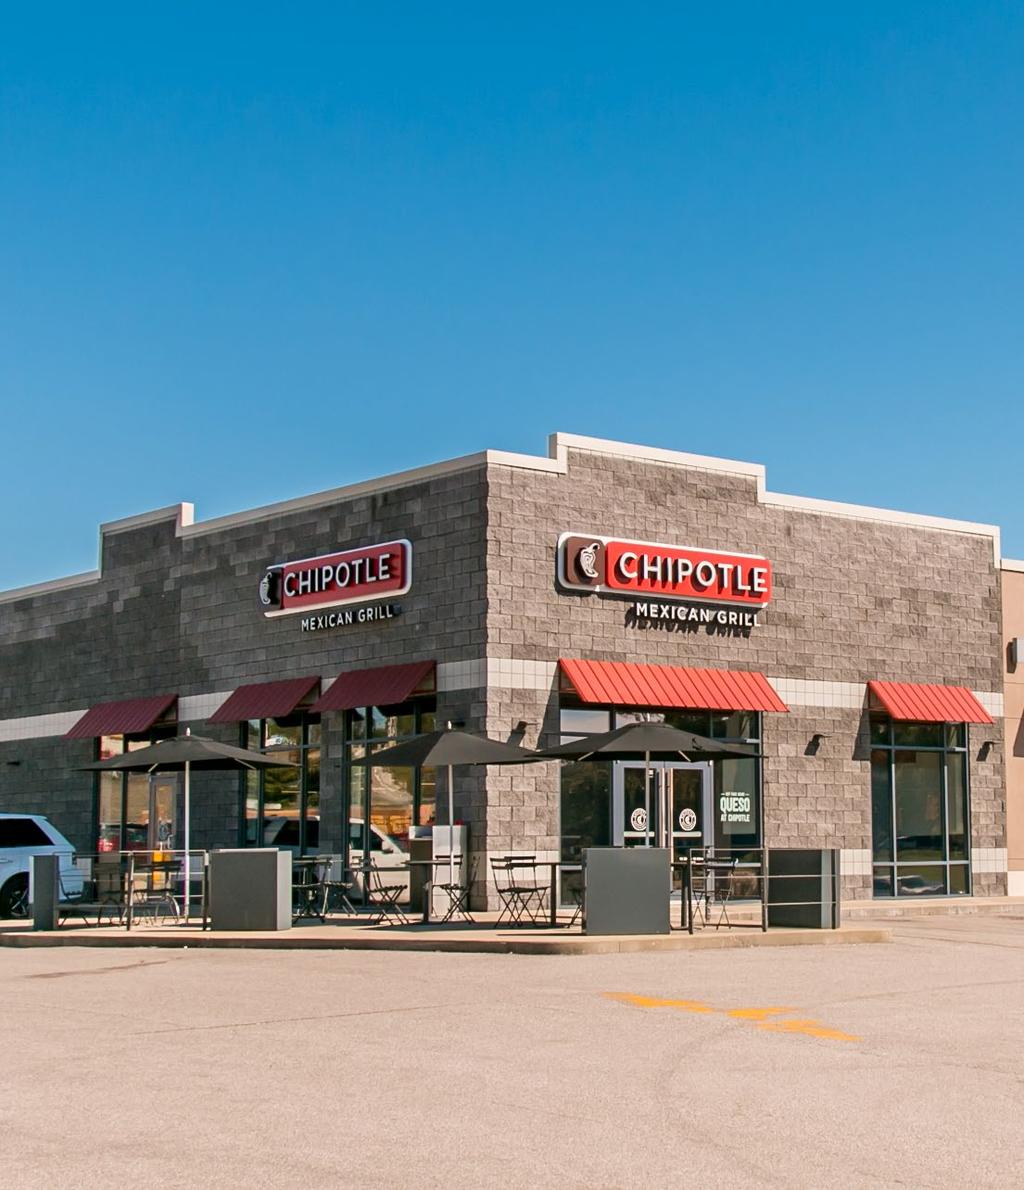 Tenant Overview - CHIPOTLE Chipotle Mexican Grill, Incorporated (Inc) operates Chipotle Mexican Grill restaurants, which serve a focused menu of burritos, tacos, burrito bowls and salads, made using